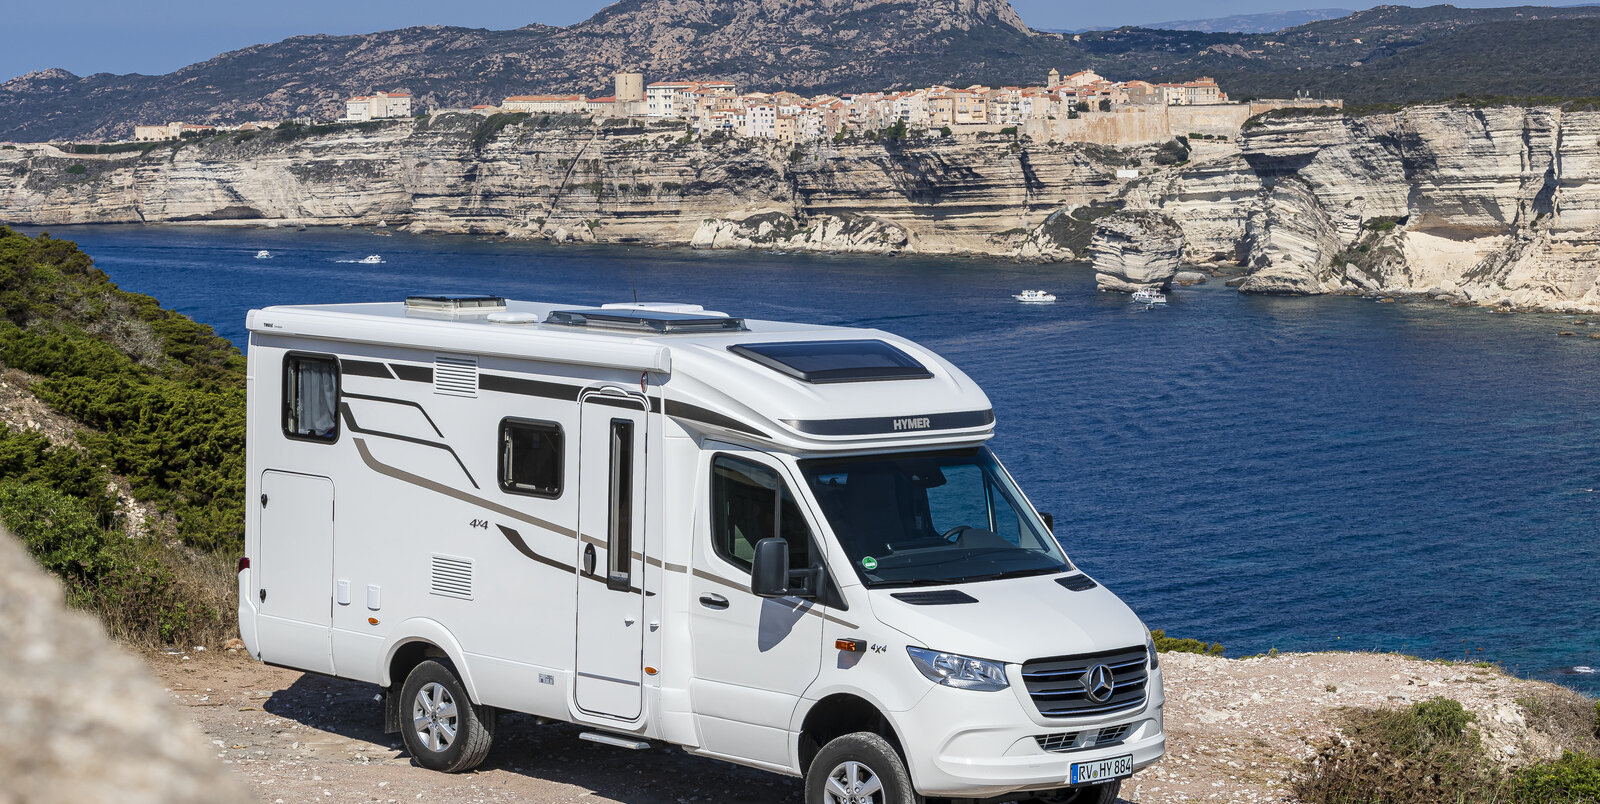 HYMER ML-T 570 in front of the sea mouth with azure blue water and rock formation with houses on the other bank